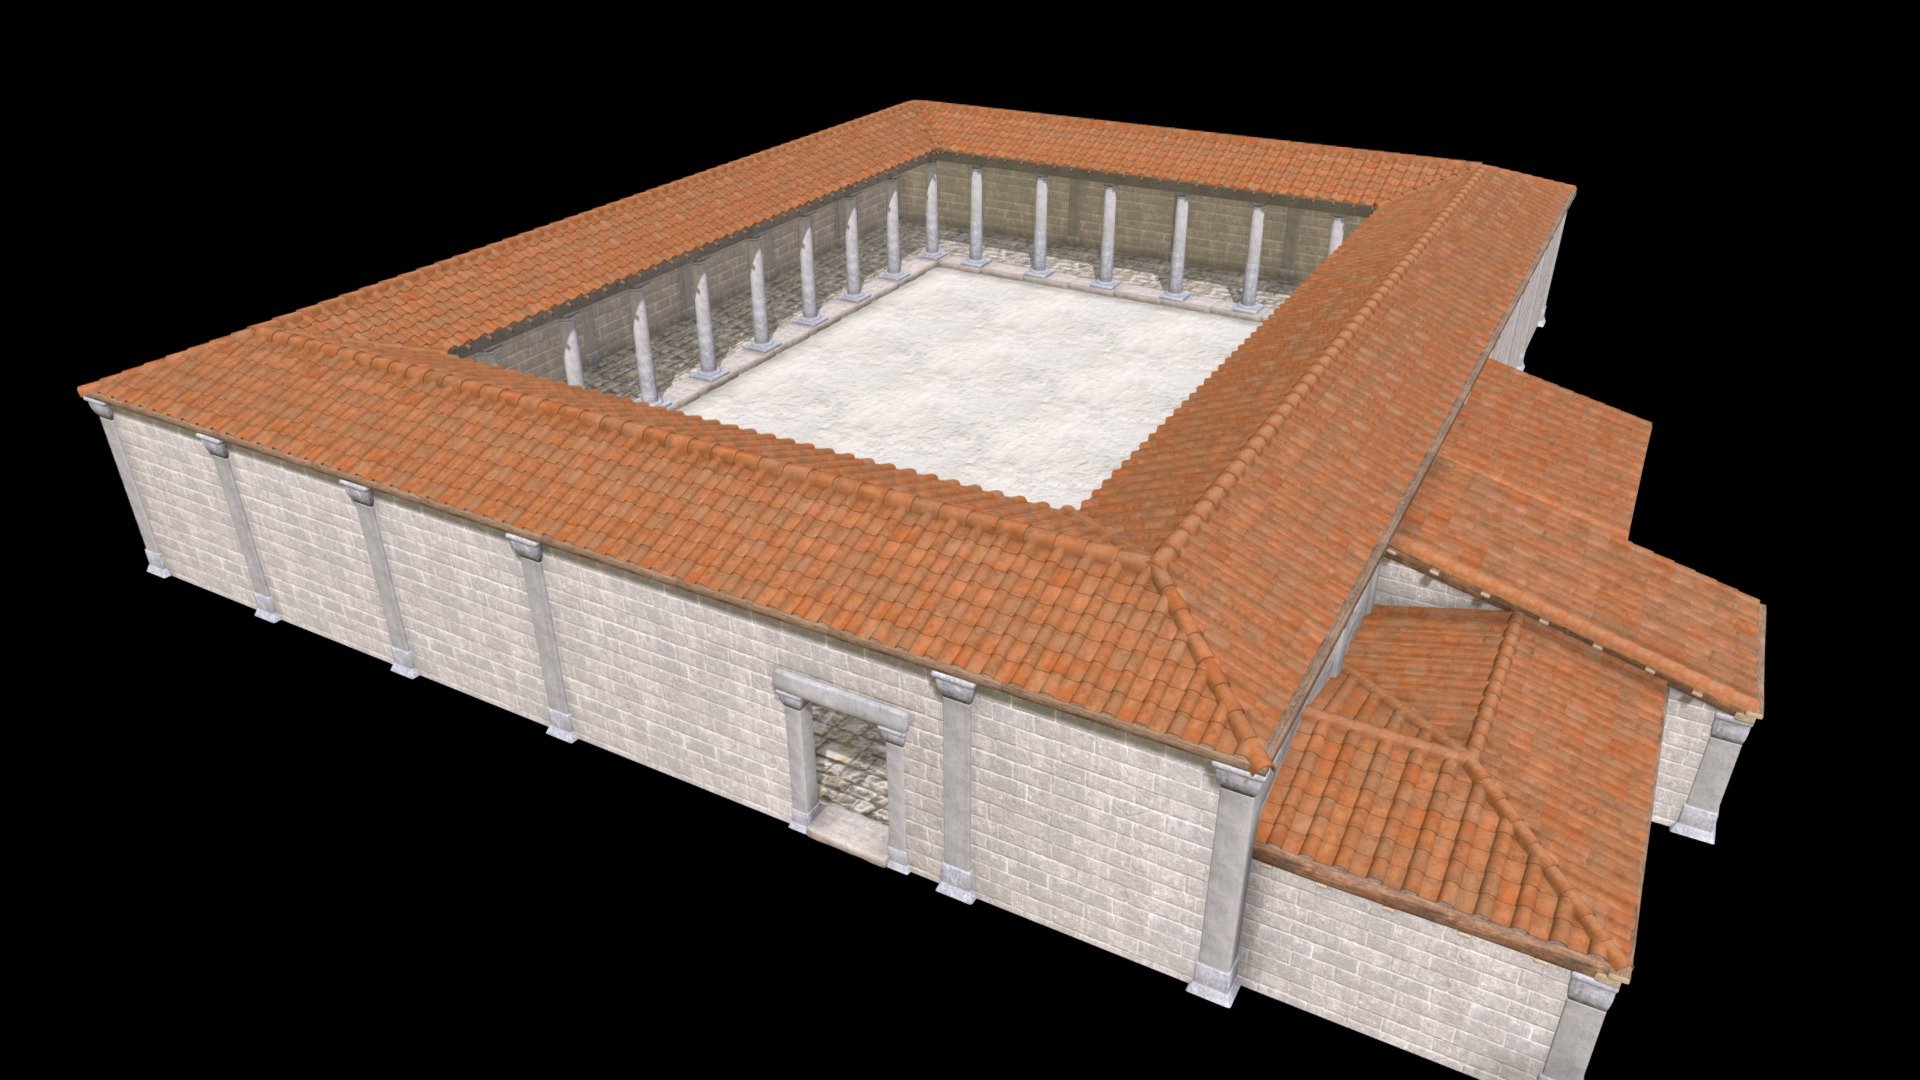 An old Palaestra, which was the ancient Greek place for sports activities.

The architecture of these building where overwhelmingly similar, with rectangular court surrounded by colonnades and some adjoining rooms.

All Shaders are in PBR workflow : COLOR, ROUGH and NORMAL 
Mainly in 2k 3d model